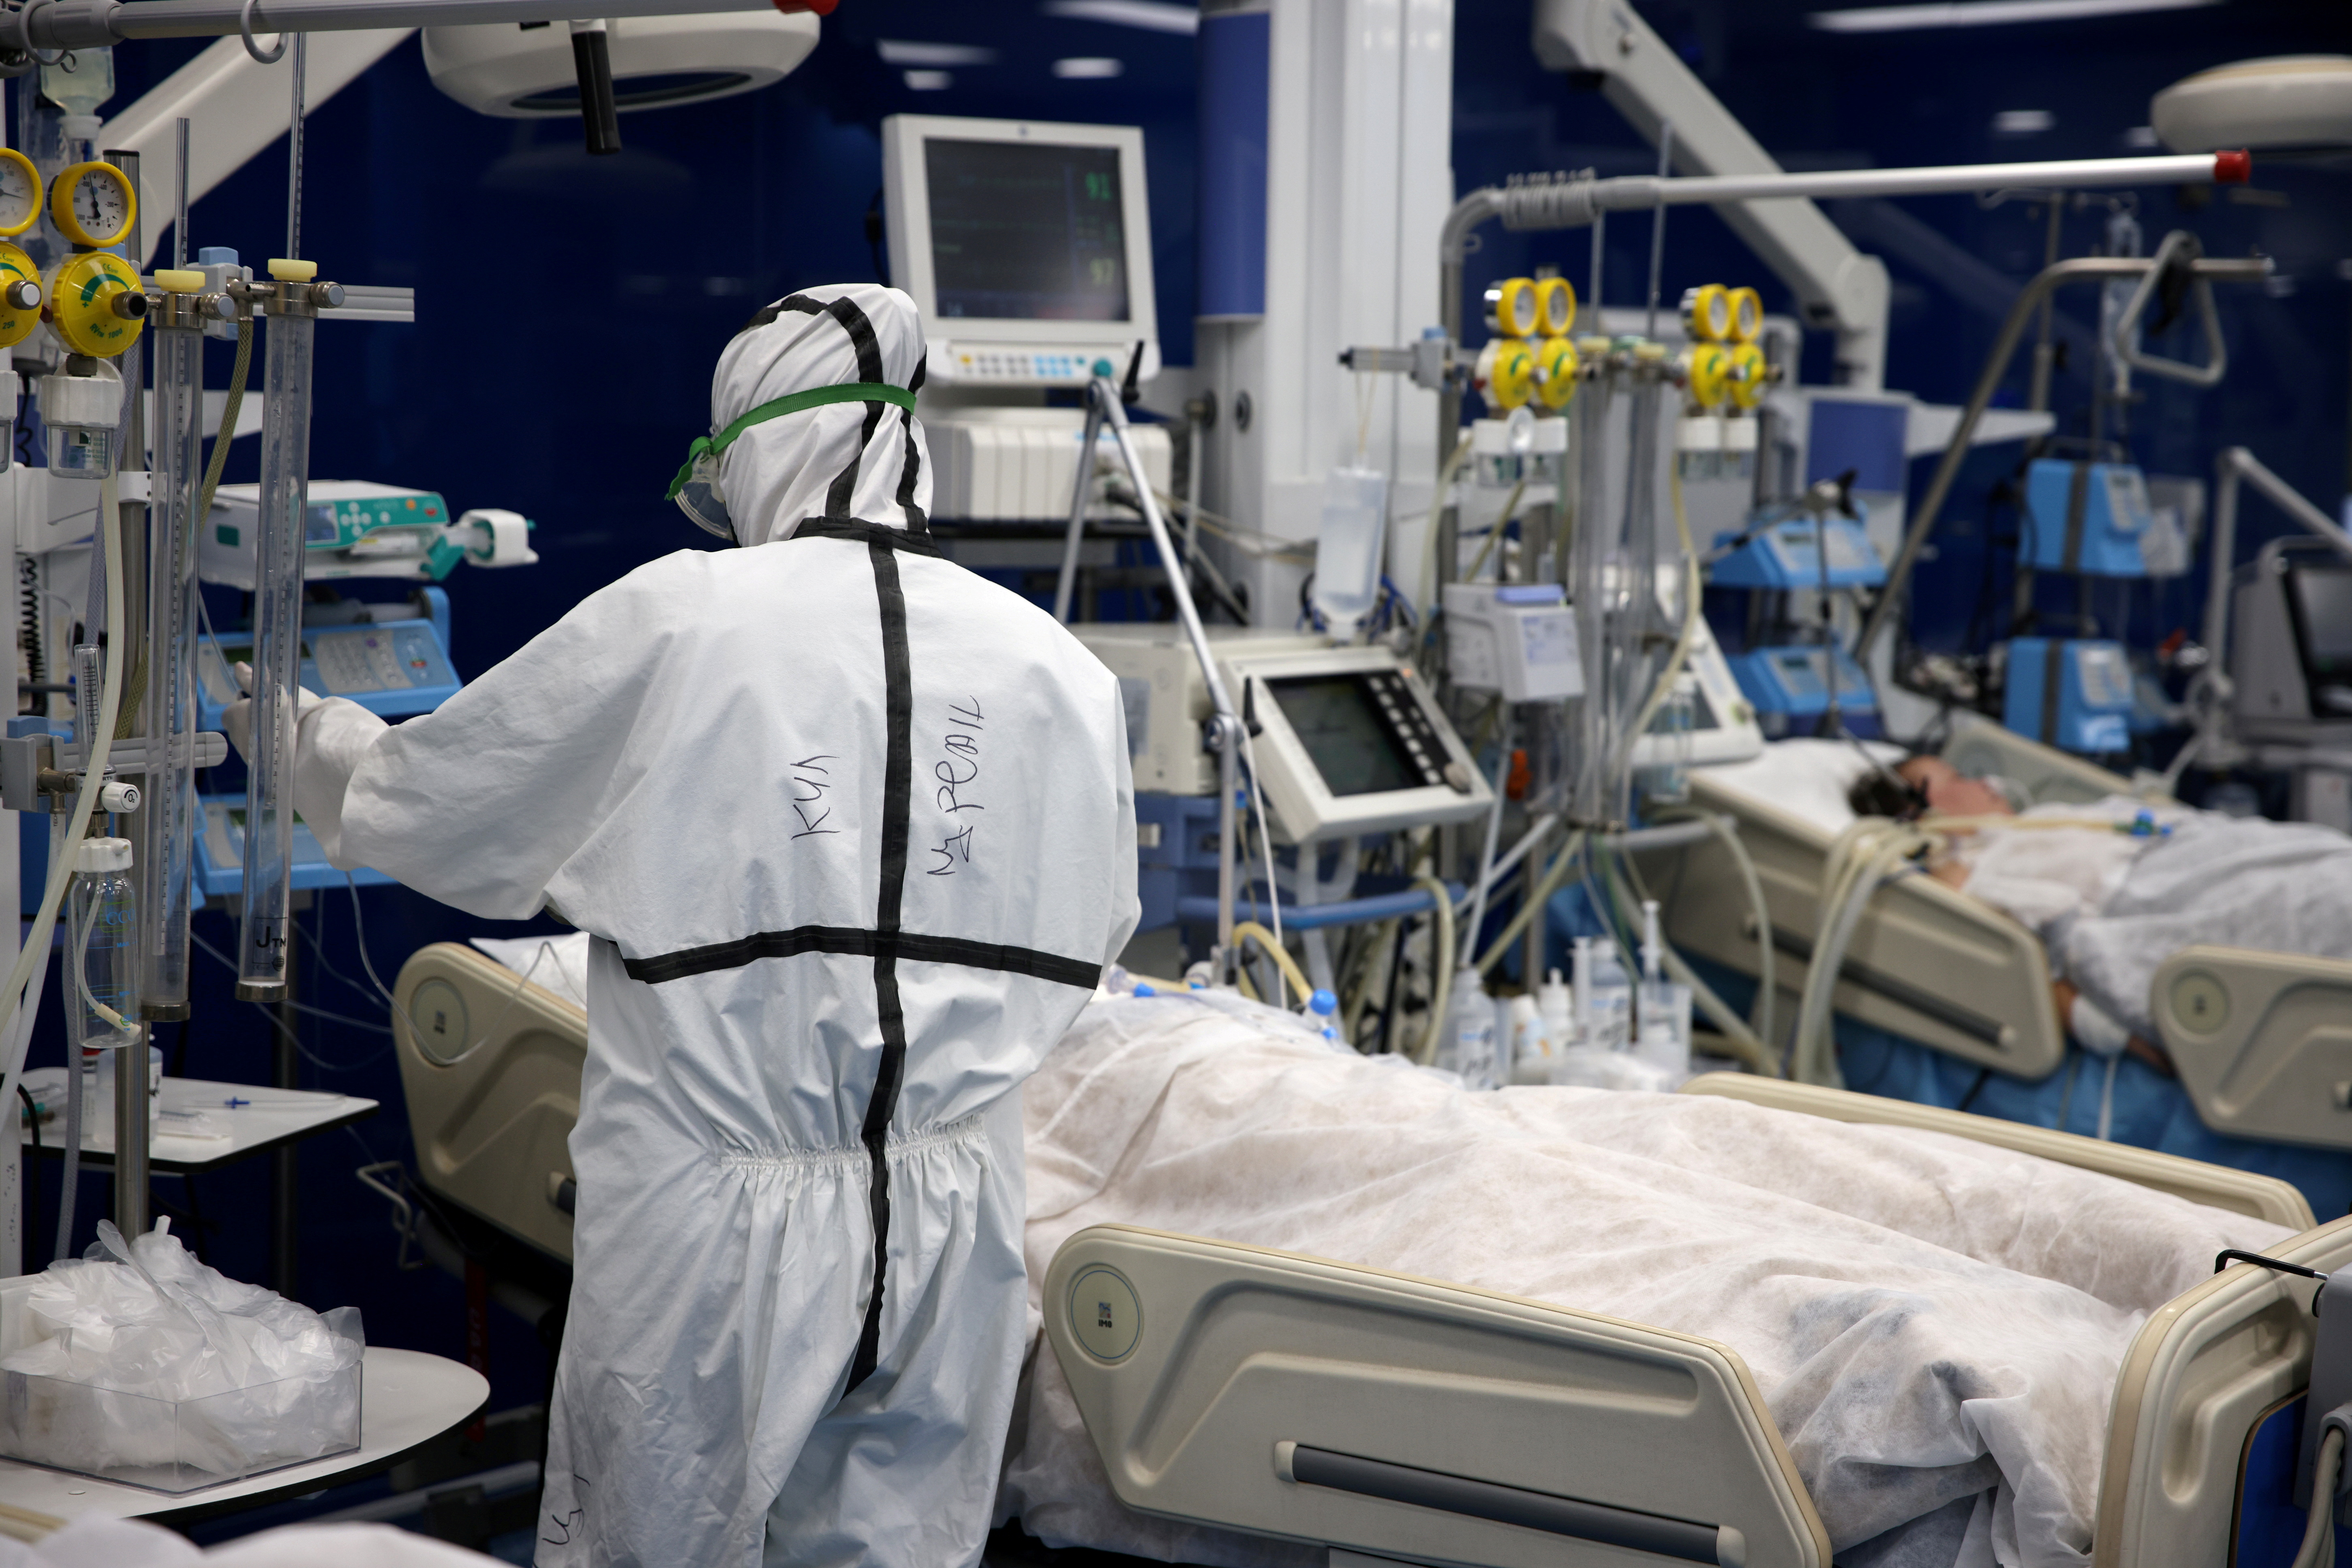 A medic tends to coronavirus disease (COVID-19) patients at the intensive care unit (ICU) of Pirogov hospital in Sofia, Bulgaria, October 15, 2021. REUTERS/Stoyan Nenov